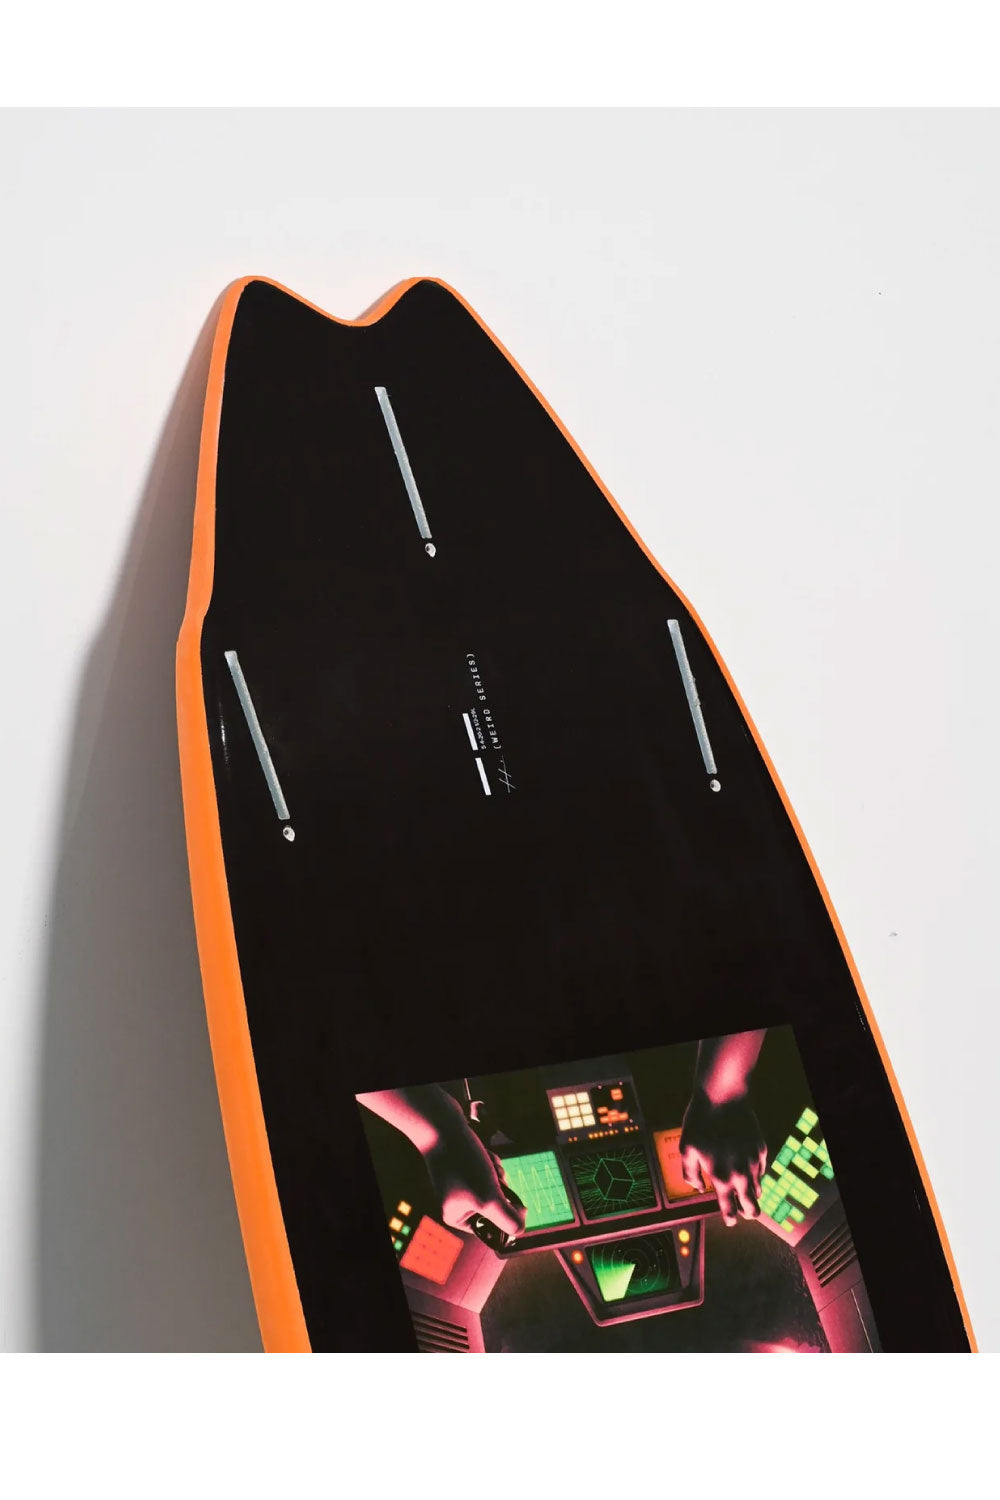 Hayden Shapes Dylan Grave Weird Waves Softboard - Comes with fins